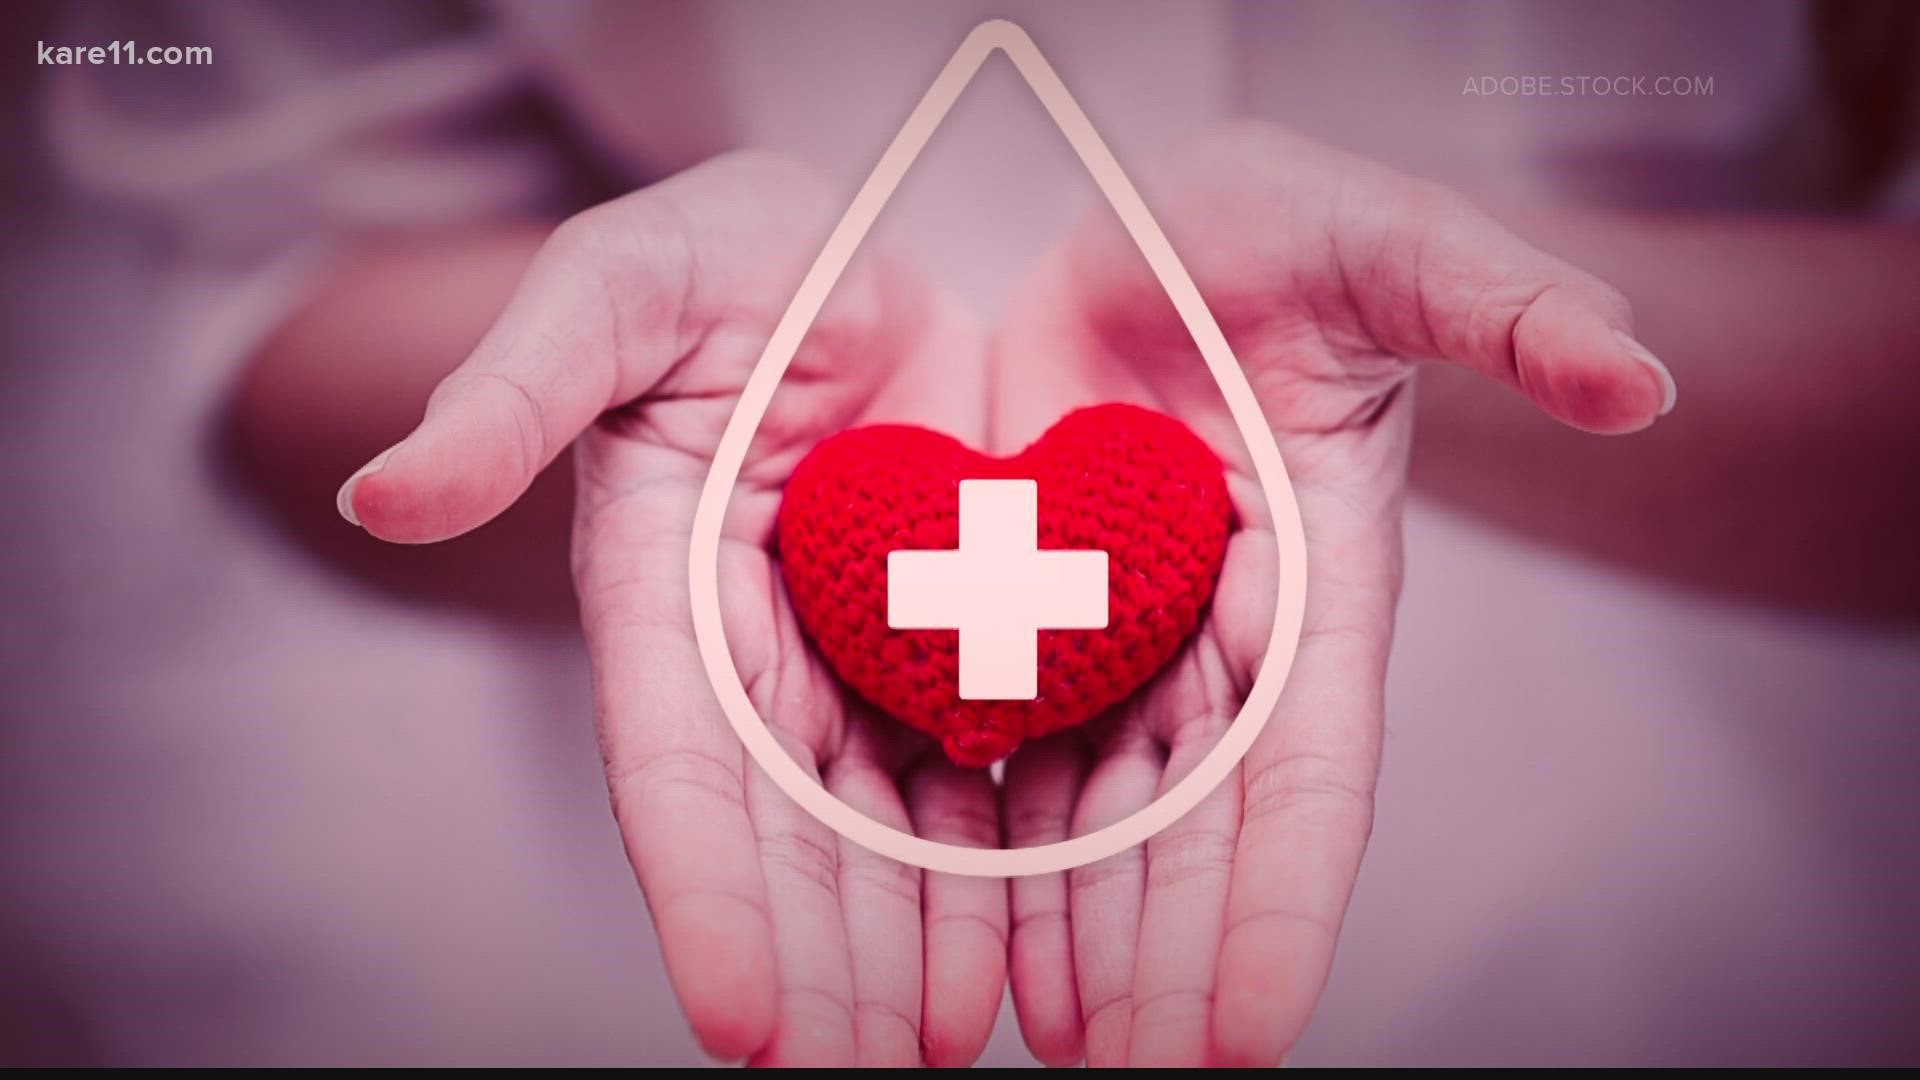 According to the Red Cross, some blood centers have less than a one-day supply of blood.